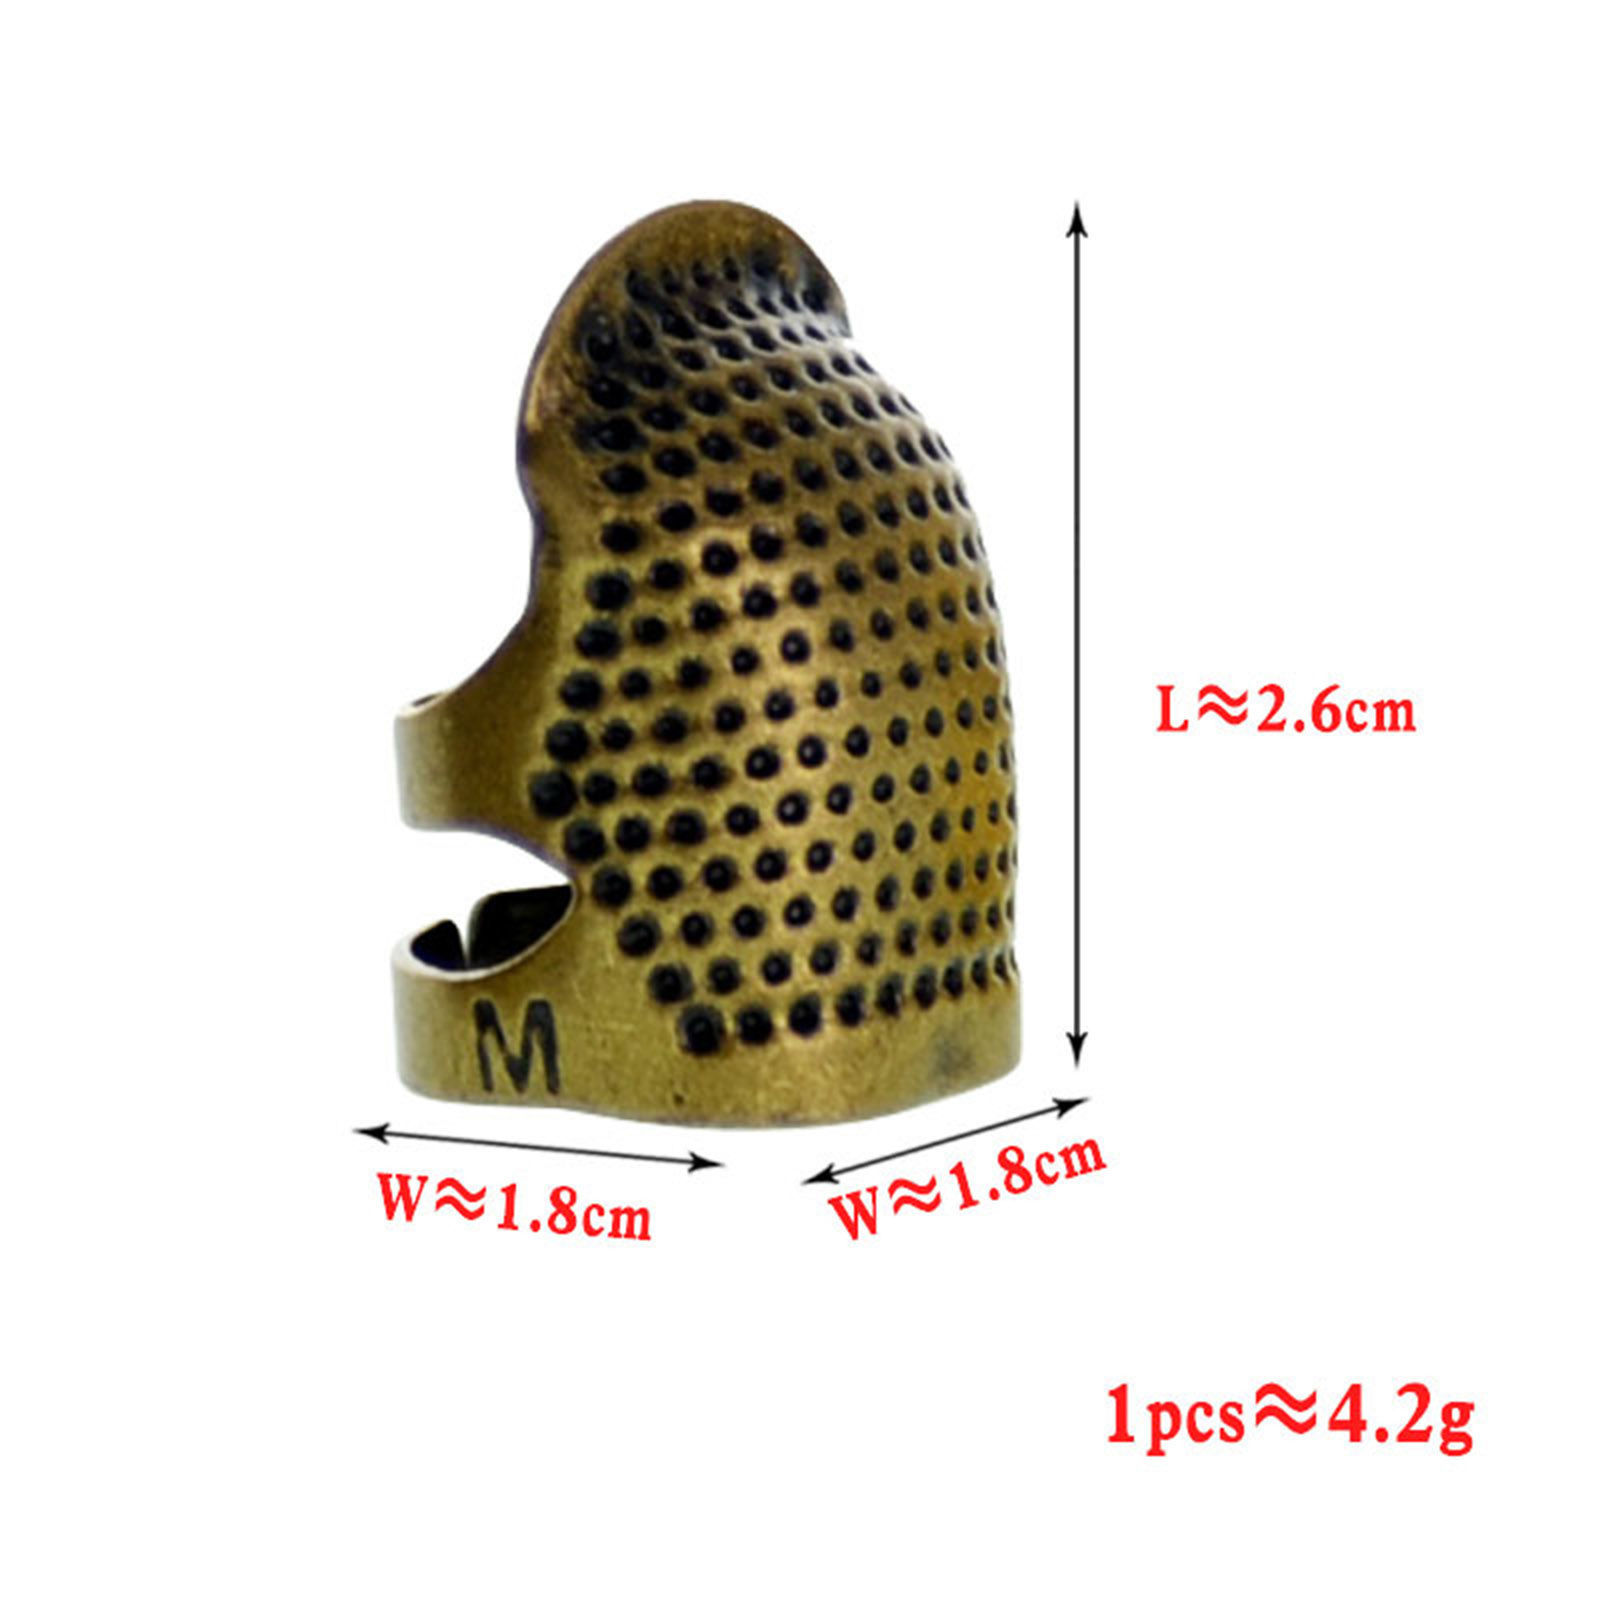 Picture of Brass Finger Thimble Protector Sewing Tools Antique Bronze 2.6cm x 1.8cm, 2 PCs